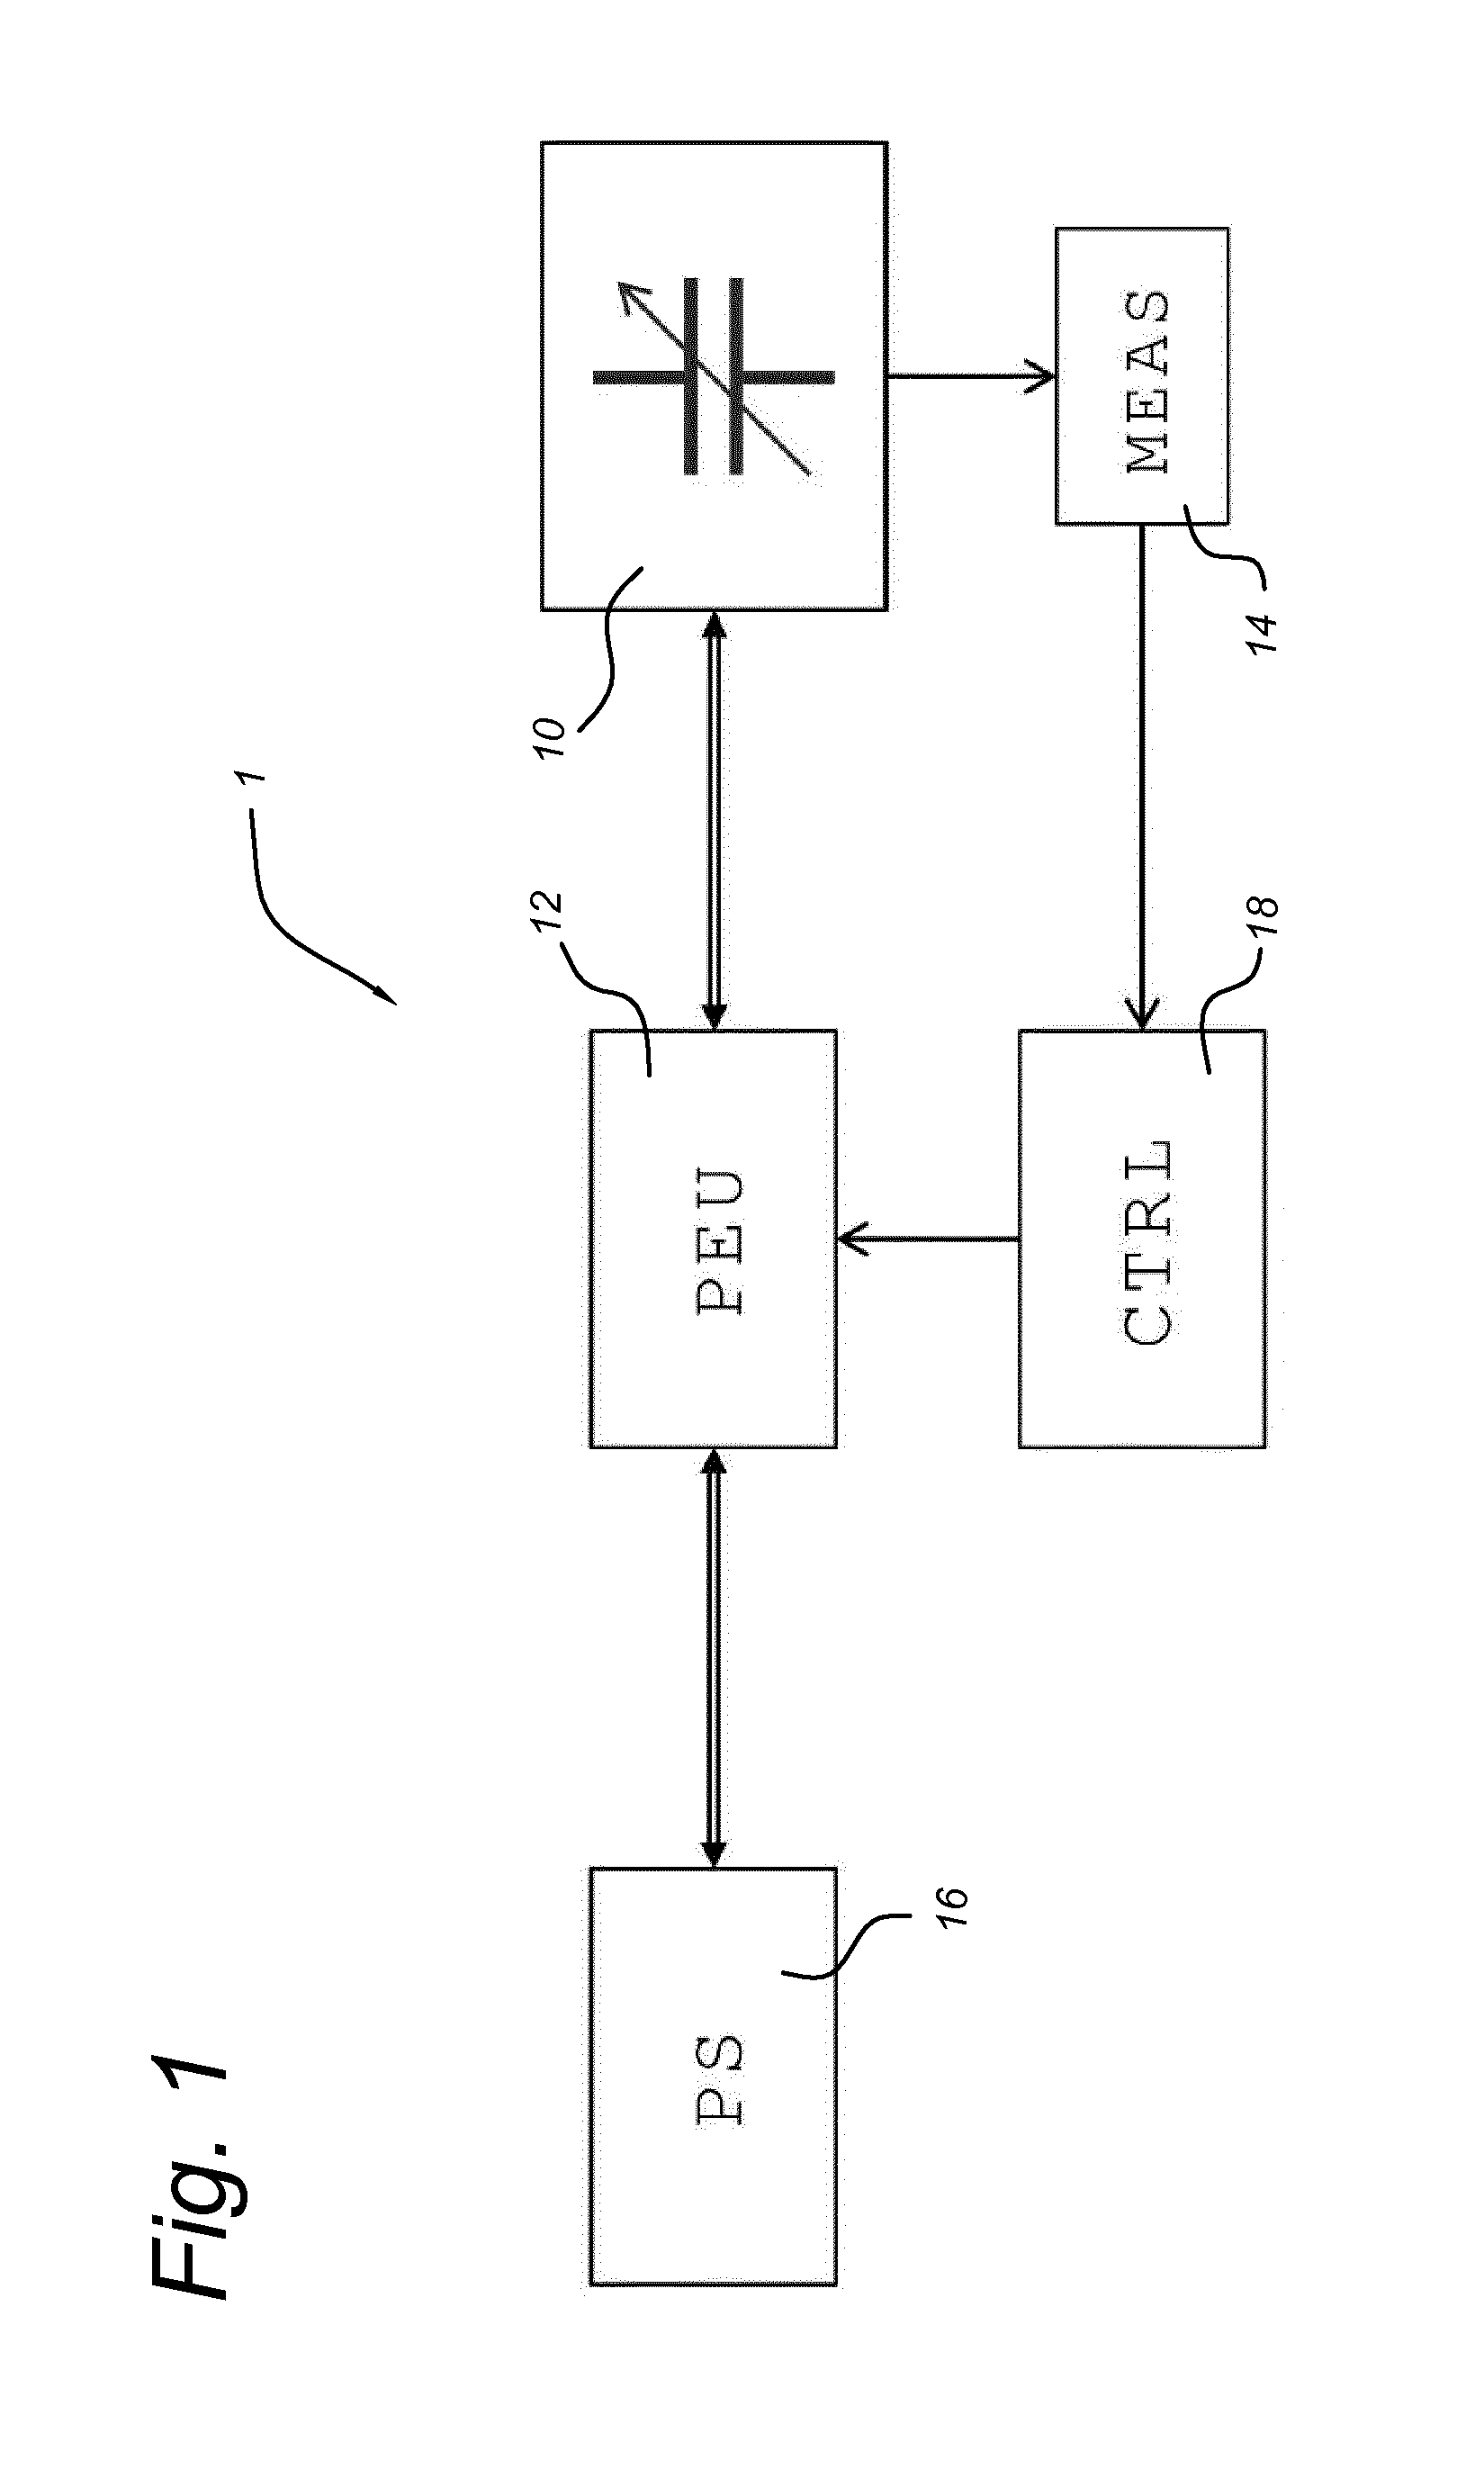 Method and system for harvesting energy using an eap based deformable body